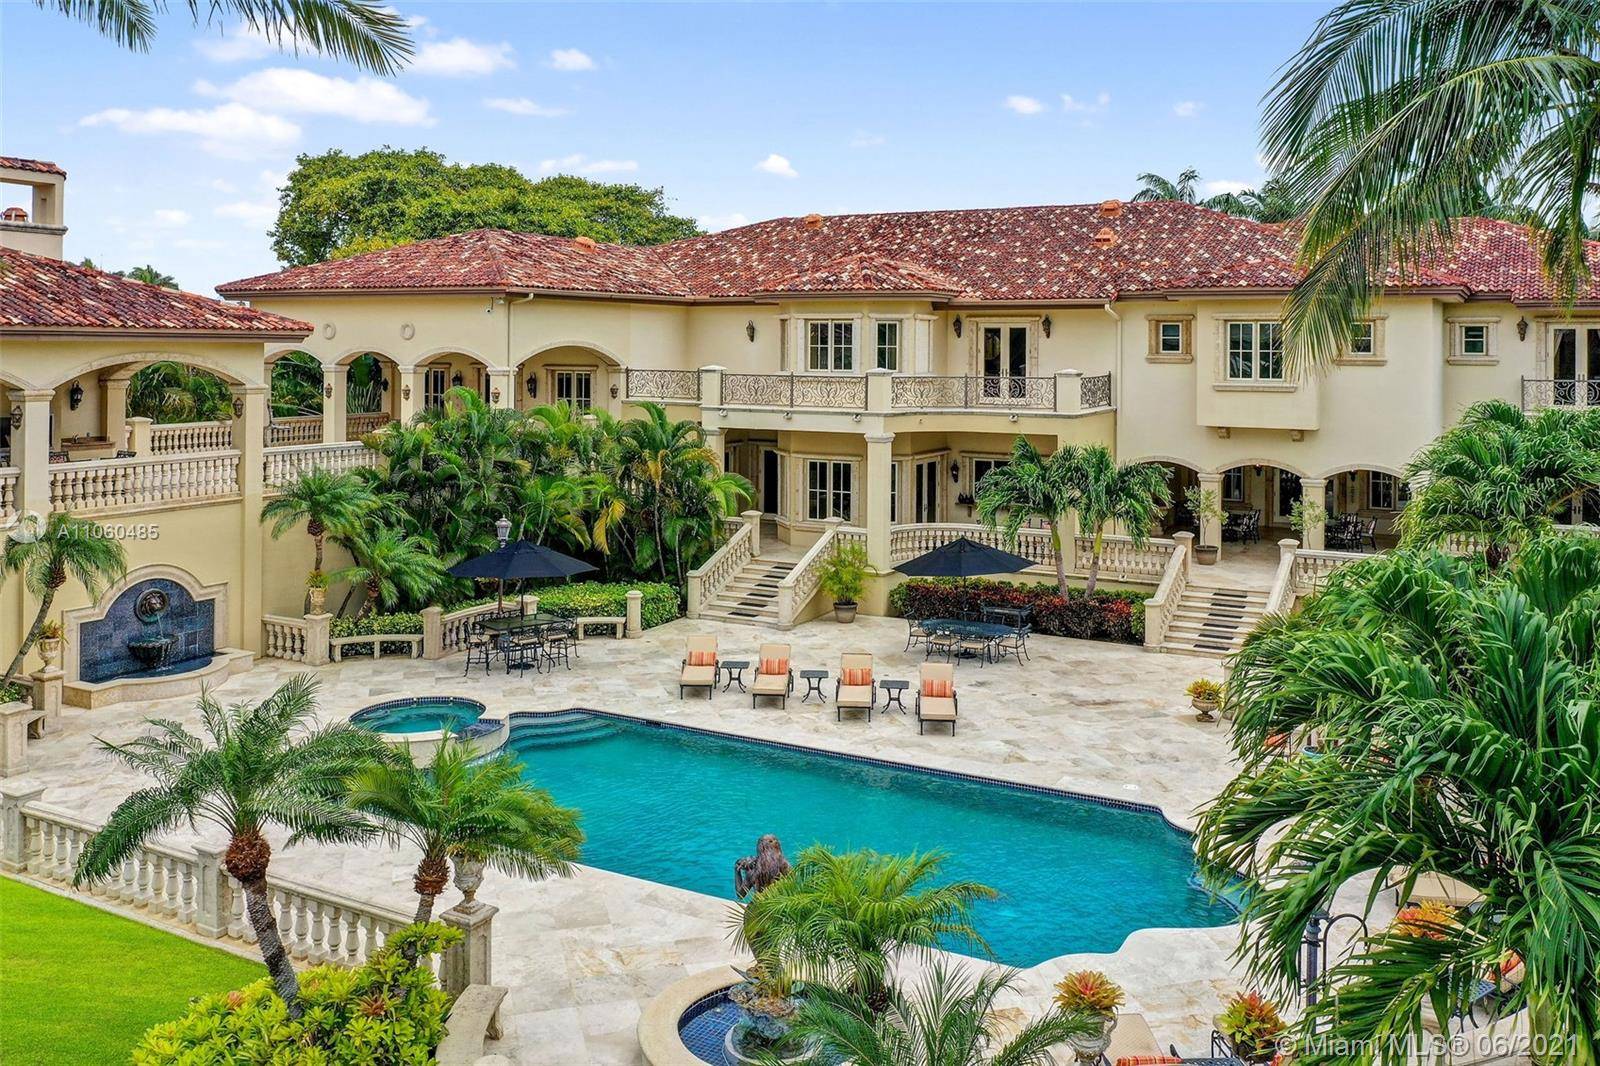 Nestled on a 62, 000 sf lot in Miami's exclusive waterfront gated community, Gables Estates.